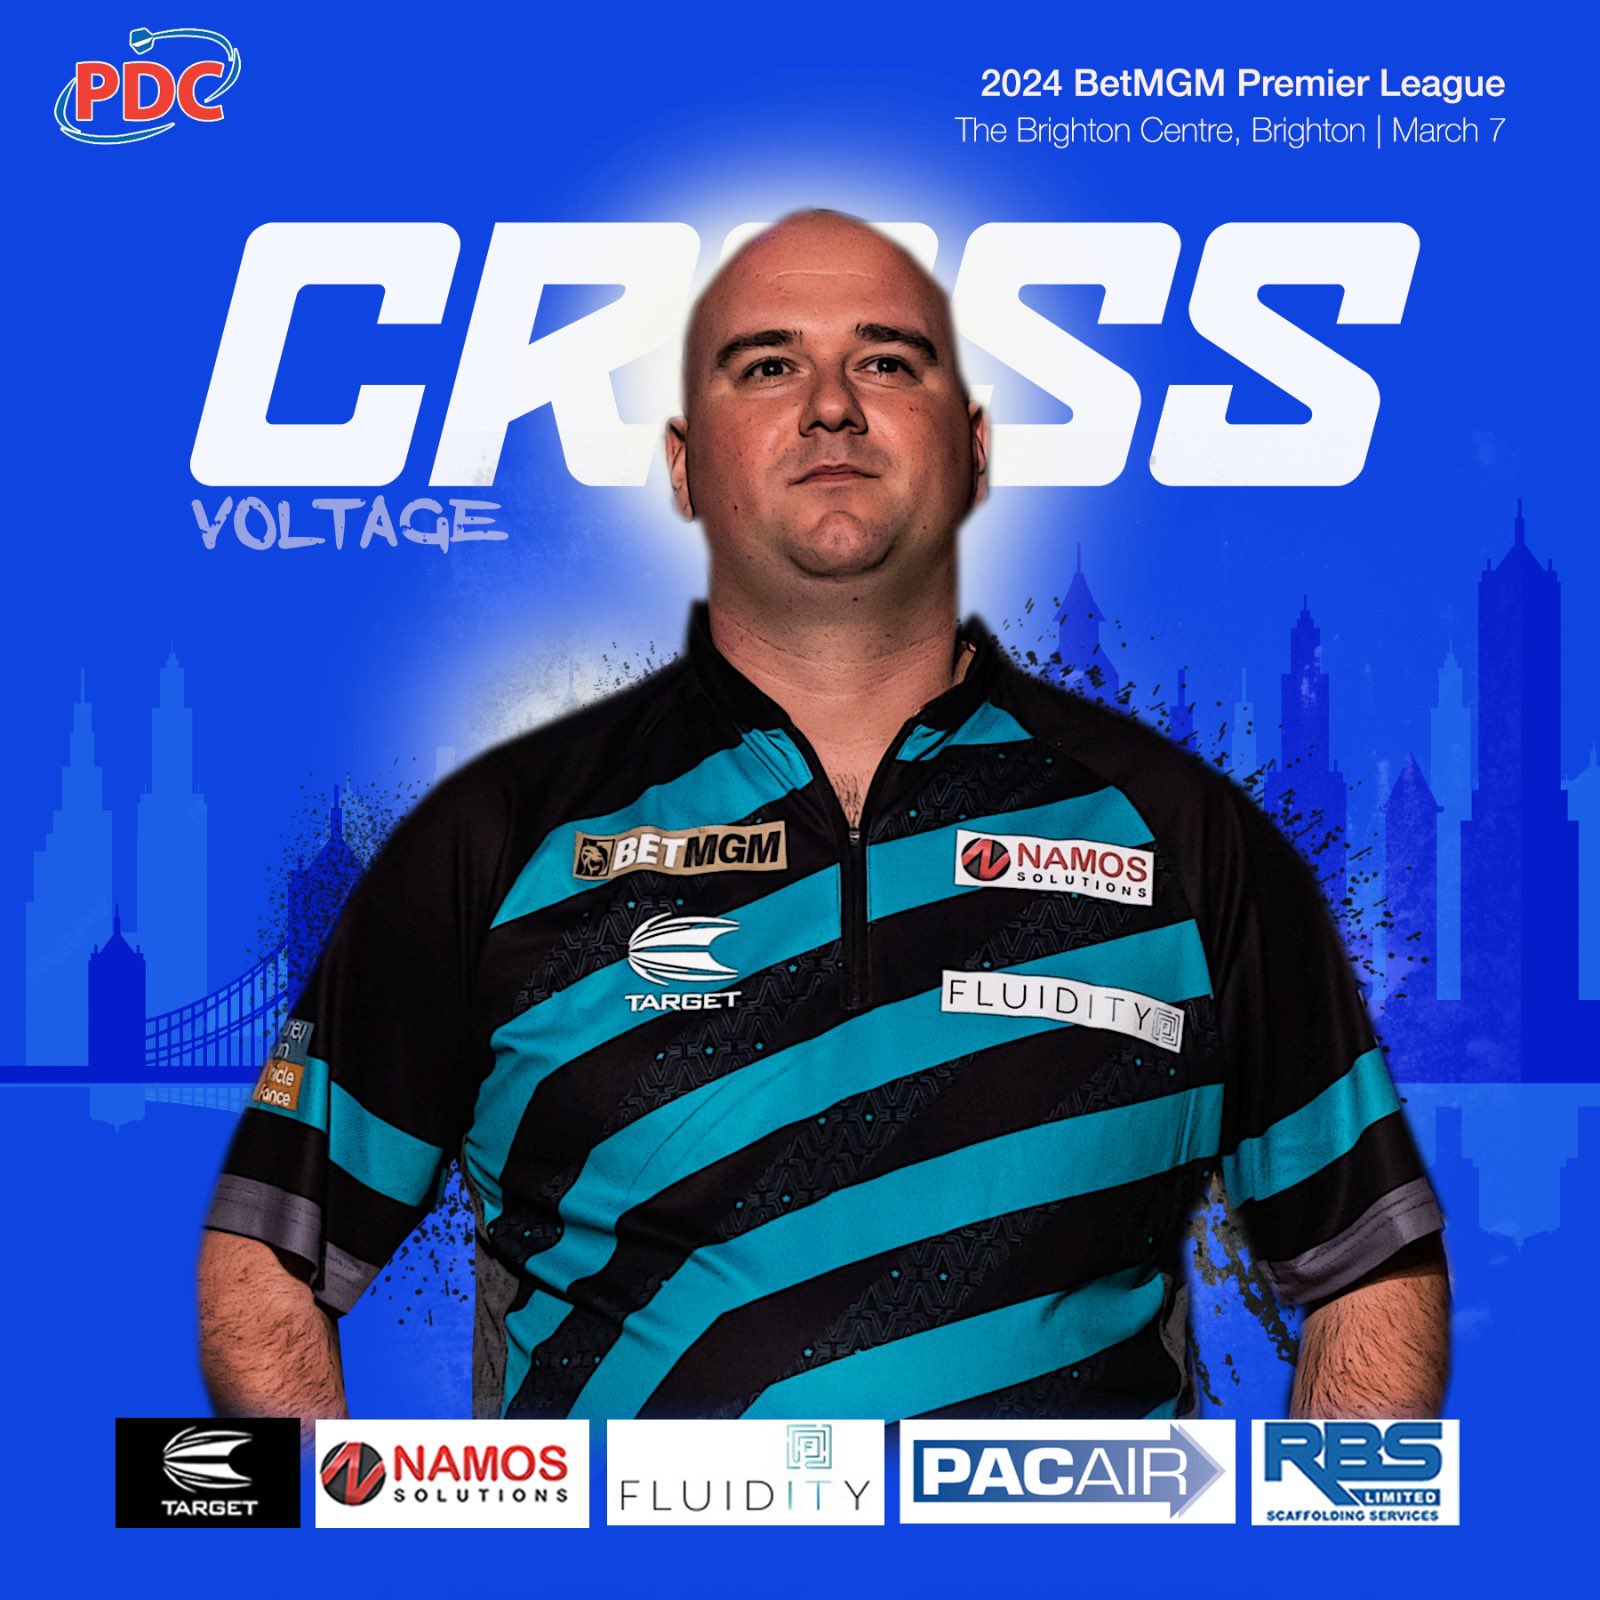 For anyone wondering, here's Rob Cross's grip : r/Darts